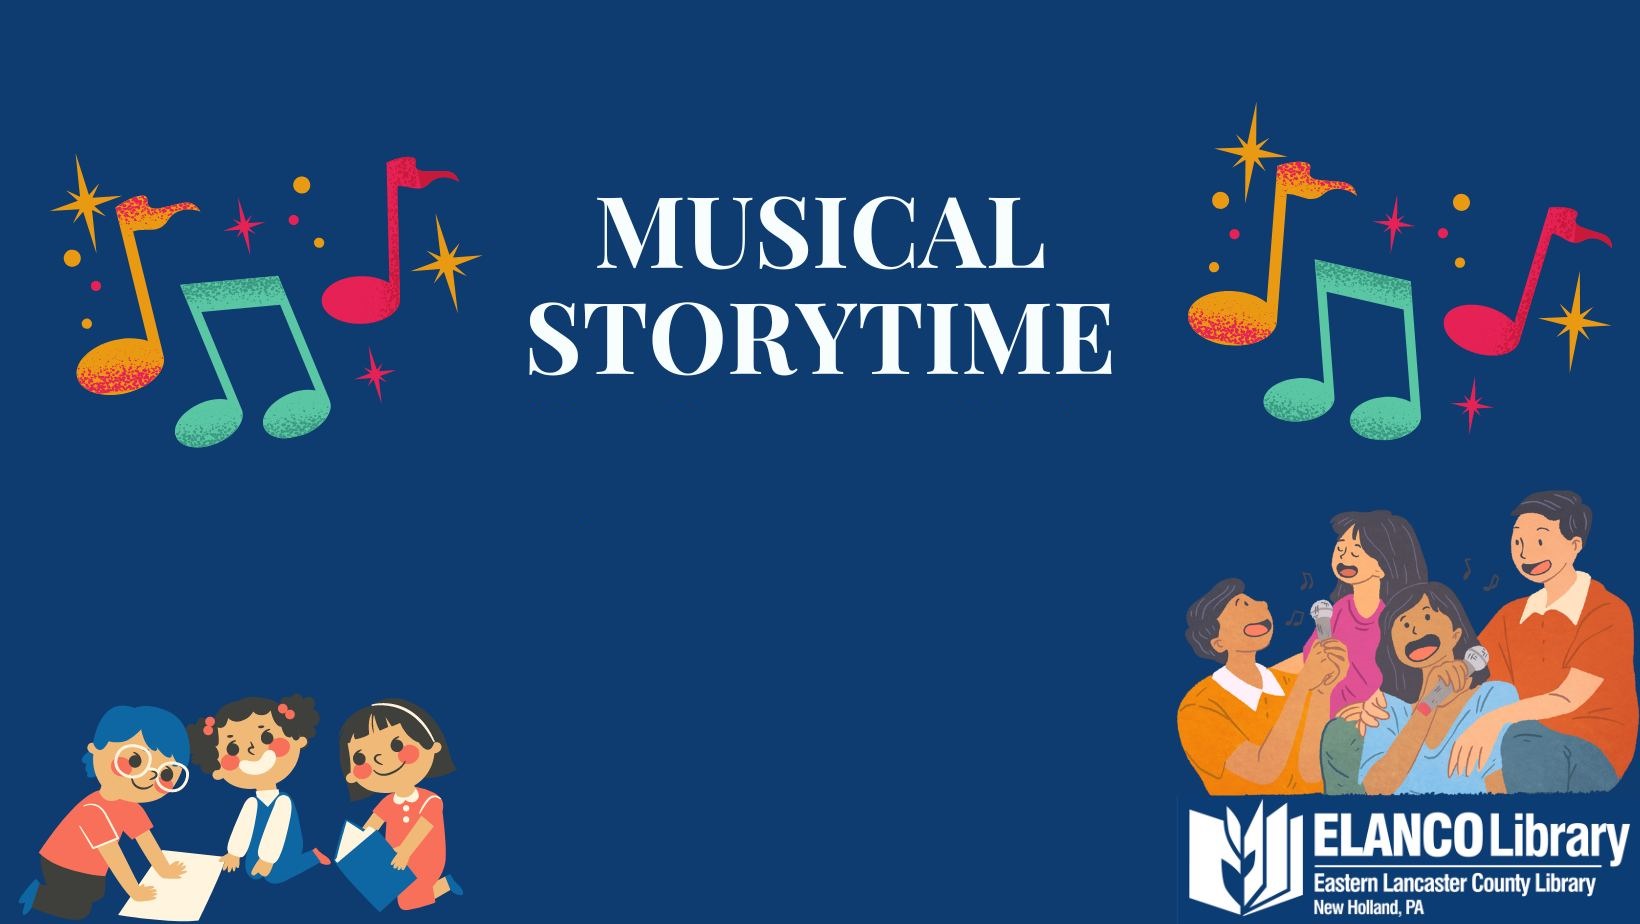 Image depicting a musical storytime